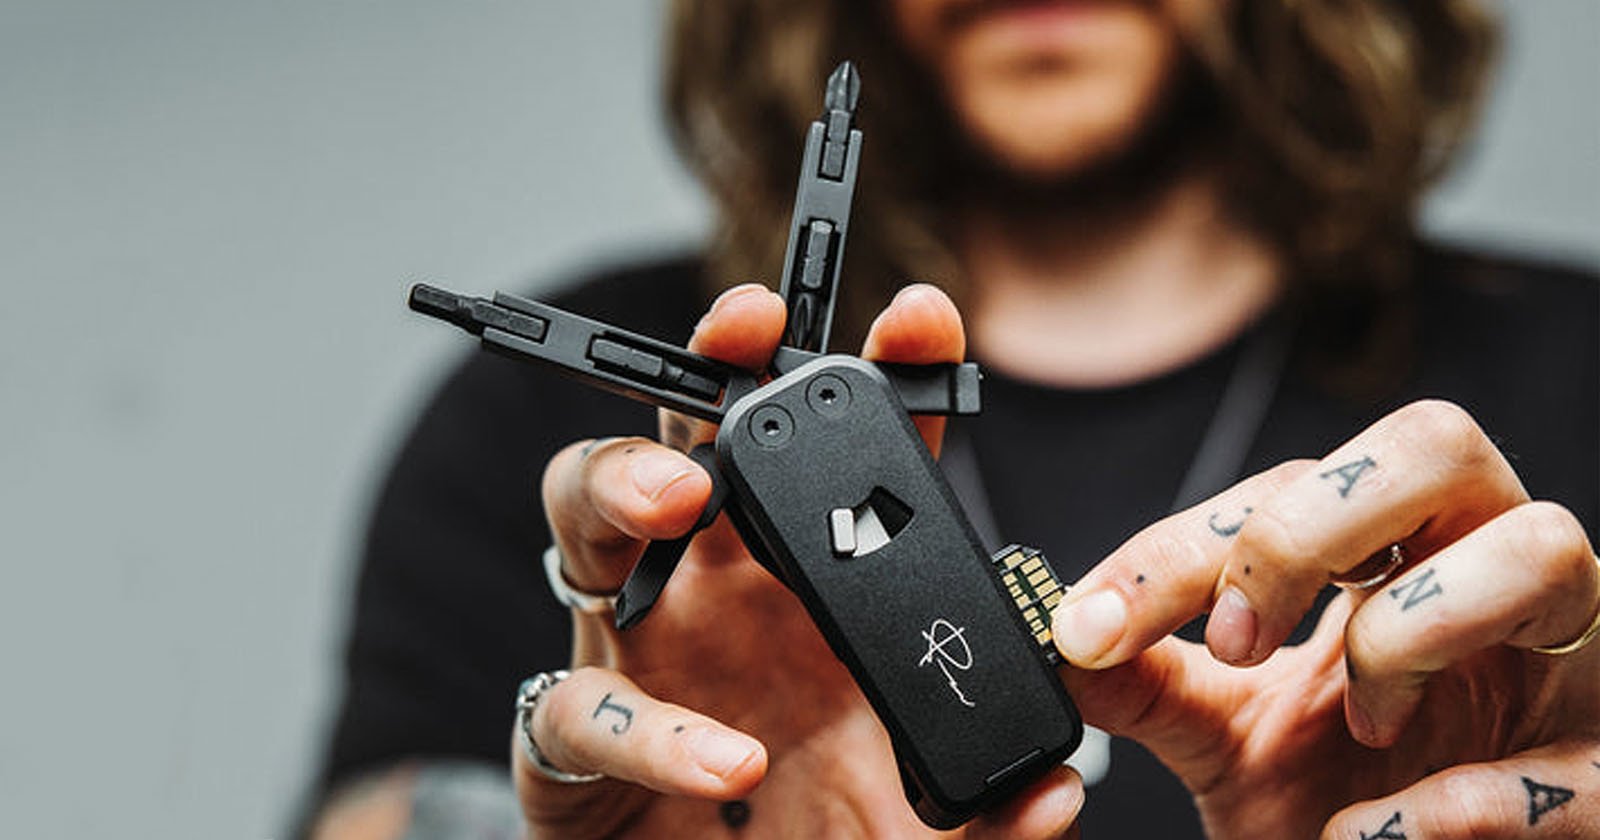 Peter McKinnons Camera Tool is a Swiss Army Knife for Photographers